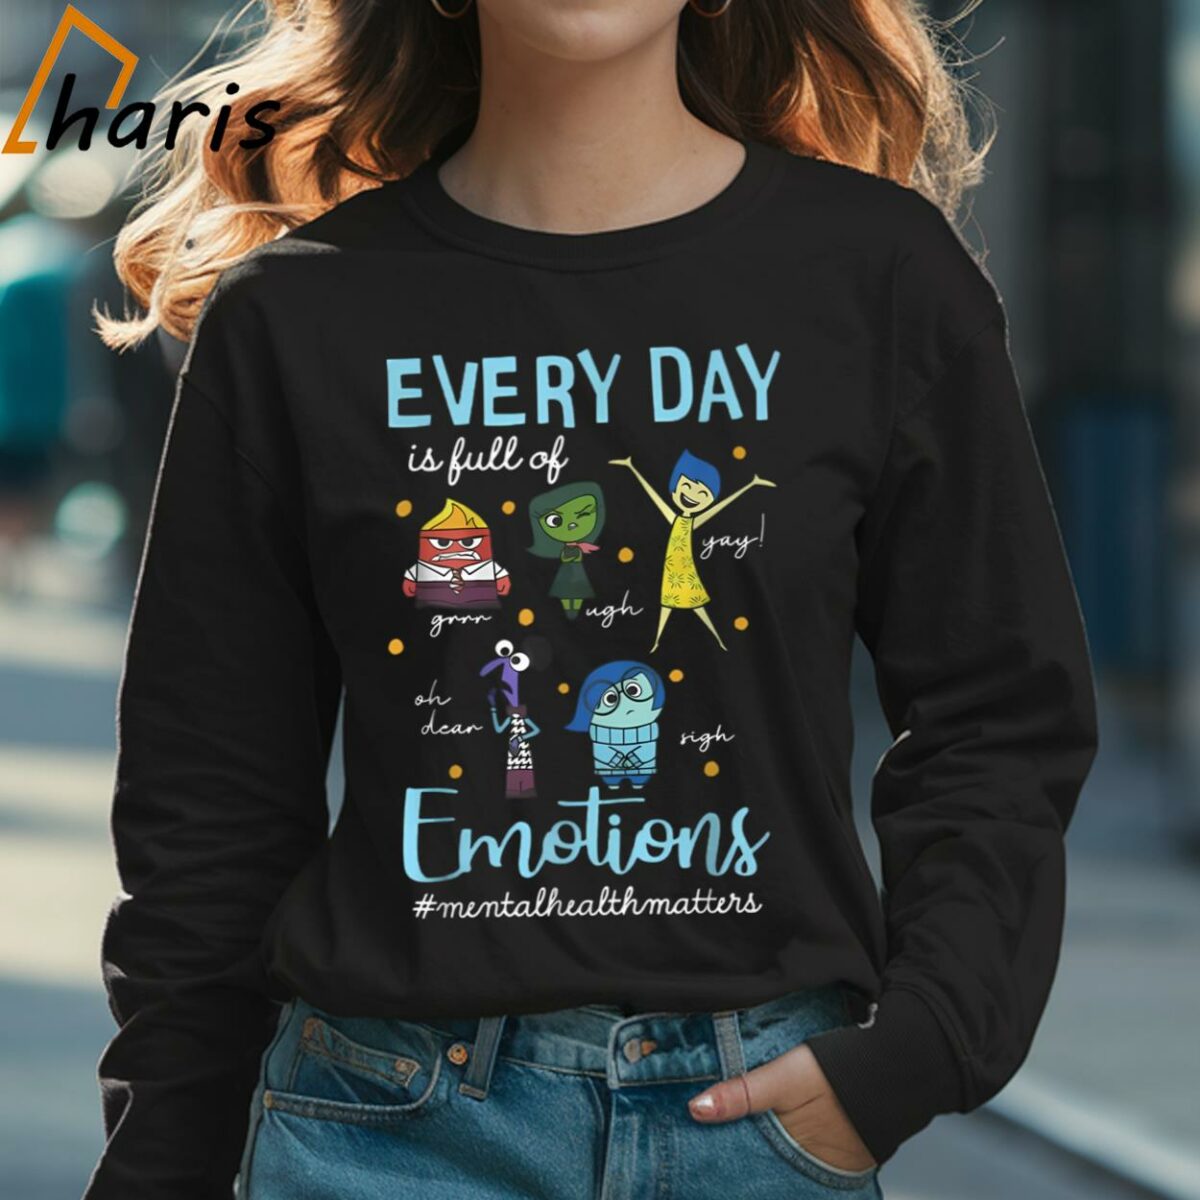 Every Day Is Full Of Emotions Disney Shirt 3 Long sleeve shirt